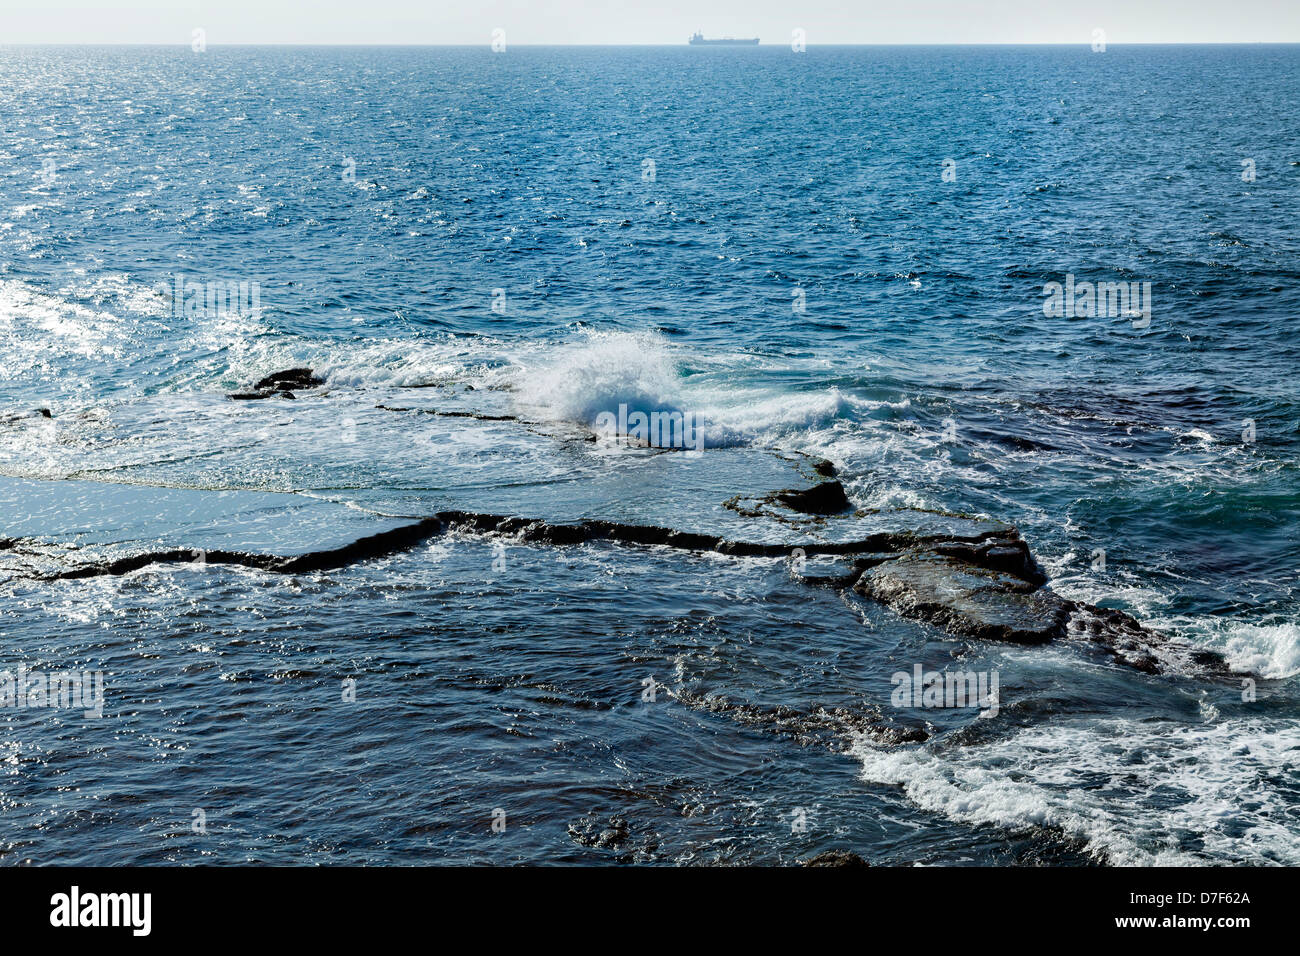 Waves crashing against a large flat rock in the Mediterranean sea. A large freighter breaking the horizon. Stock Photo